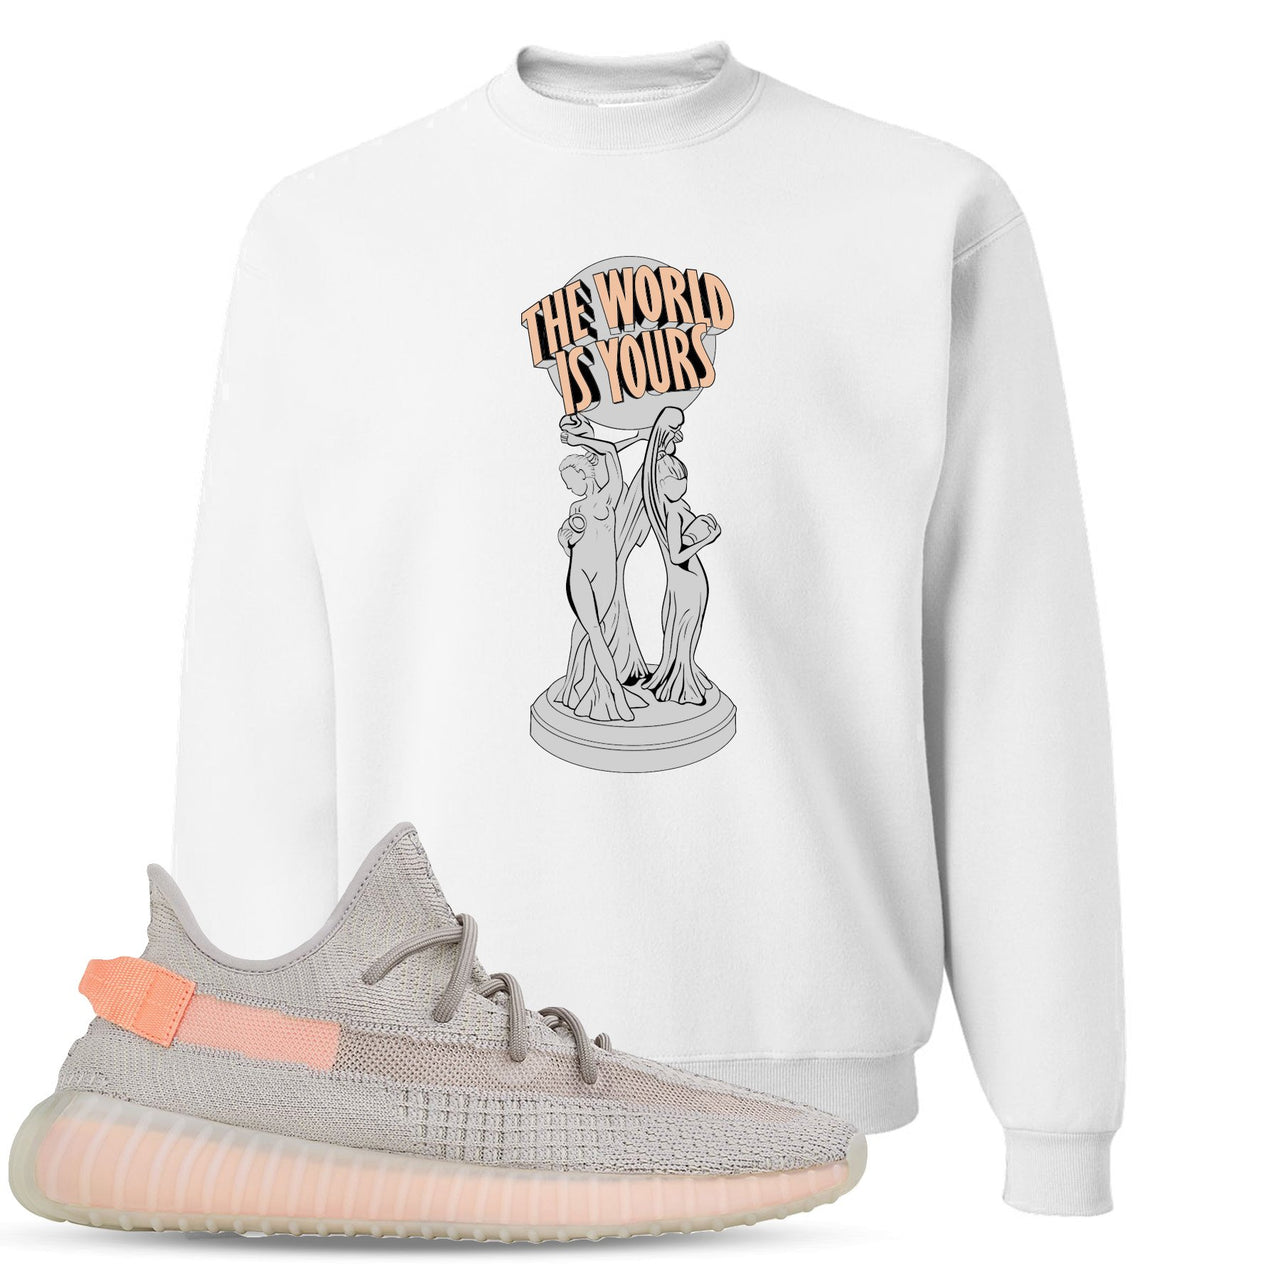 True Form v2 350s Crewneck Sweater | The World Is Yours, White